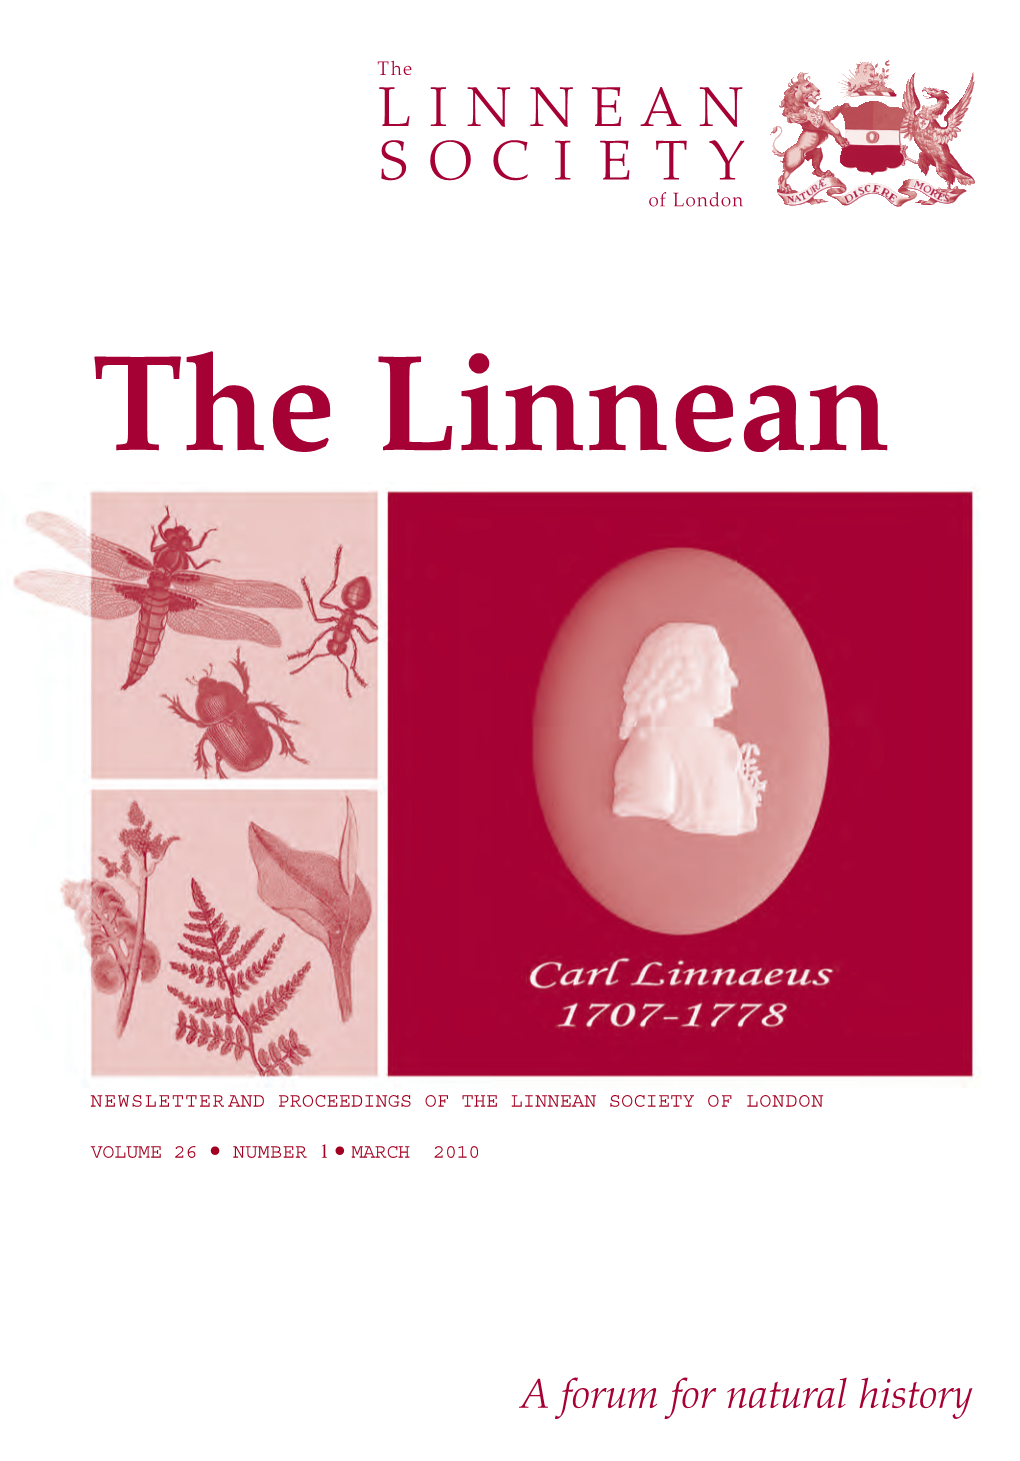 Newsletter and Proceedings of the Linnean Society of London Volume 26 • Number 1 • March 2010